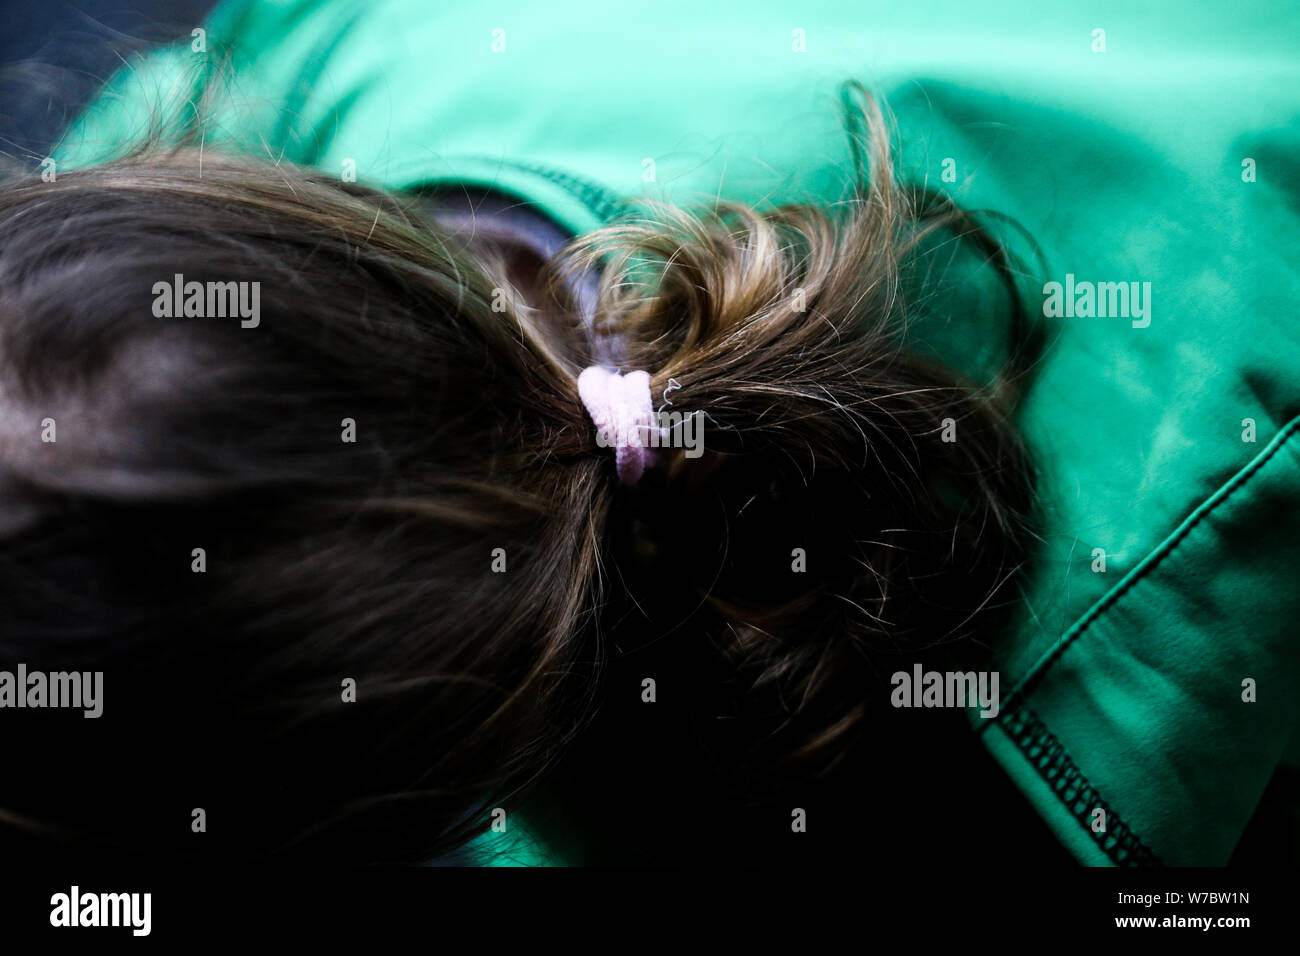 Details with the hair and scrunchie of a little girl dressed with a hoodie during a rainy day Stock Photo